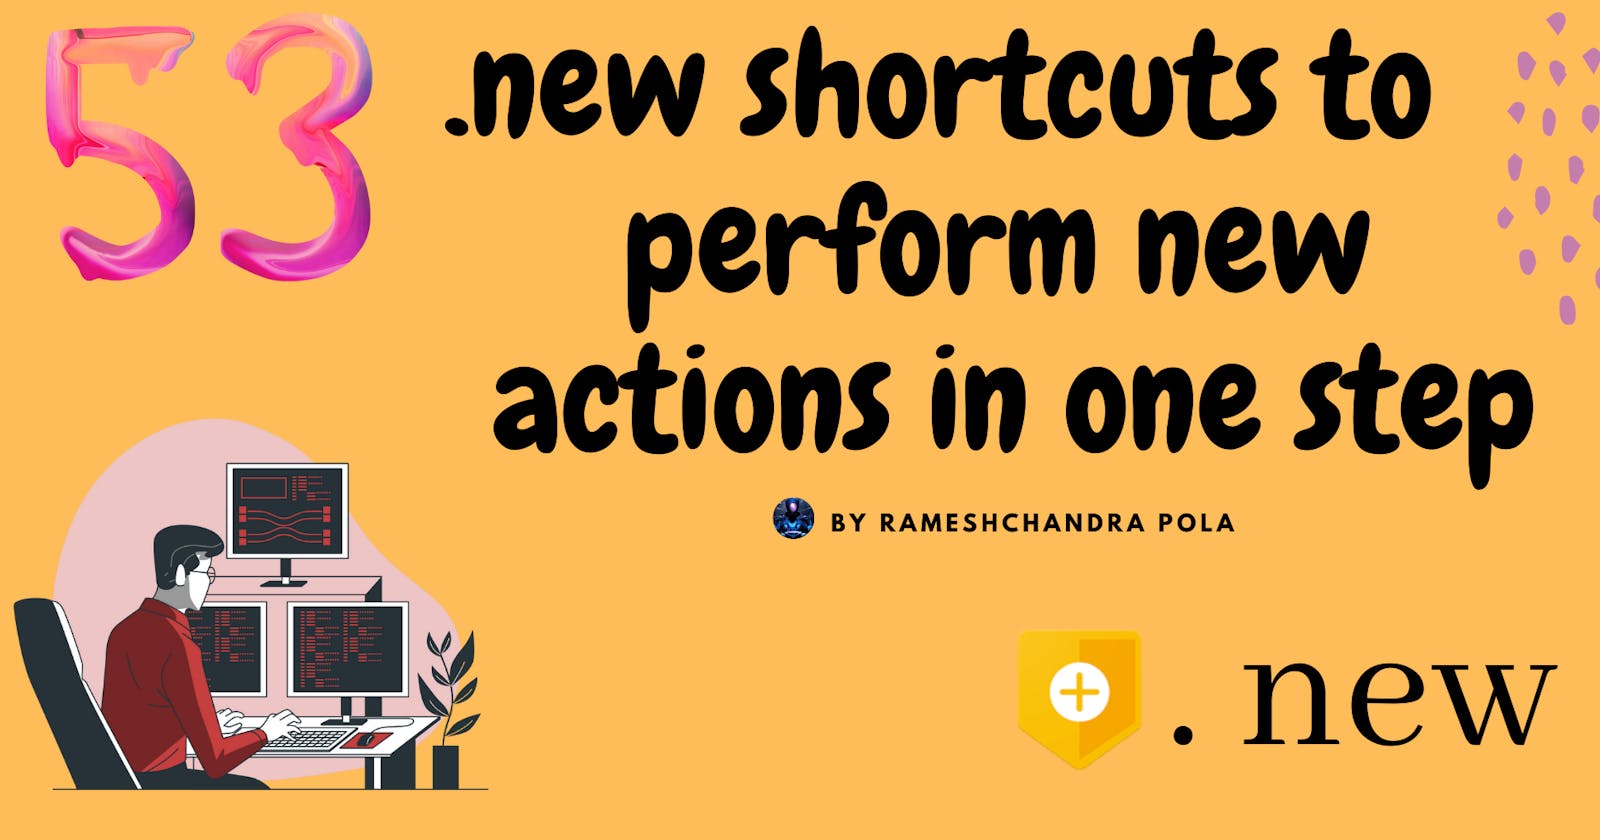 53 .new shortcuts to perform new actions in one step